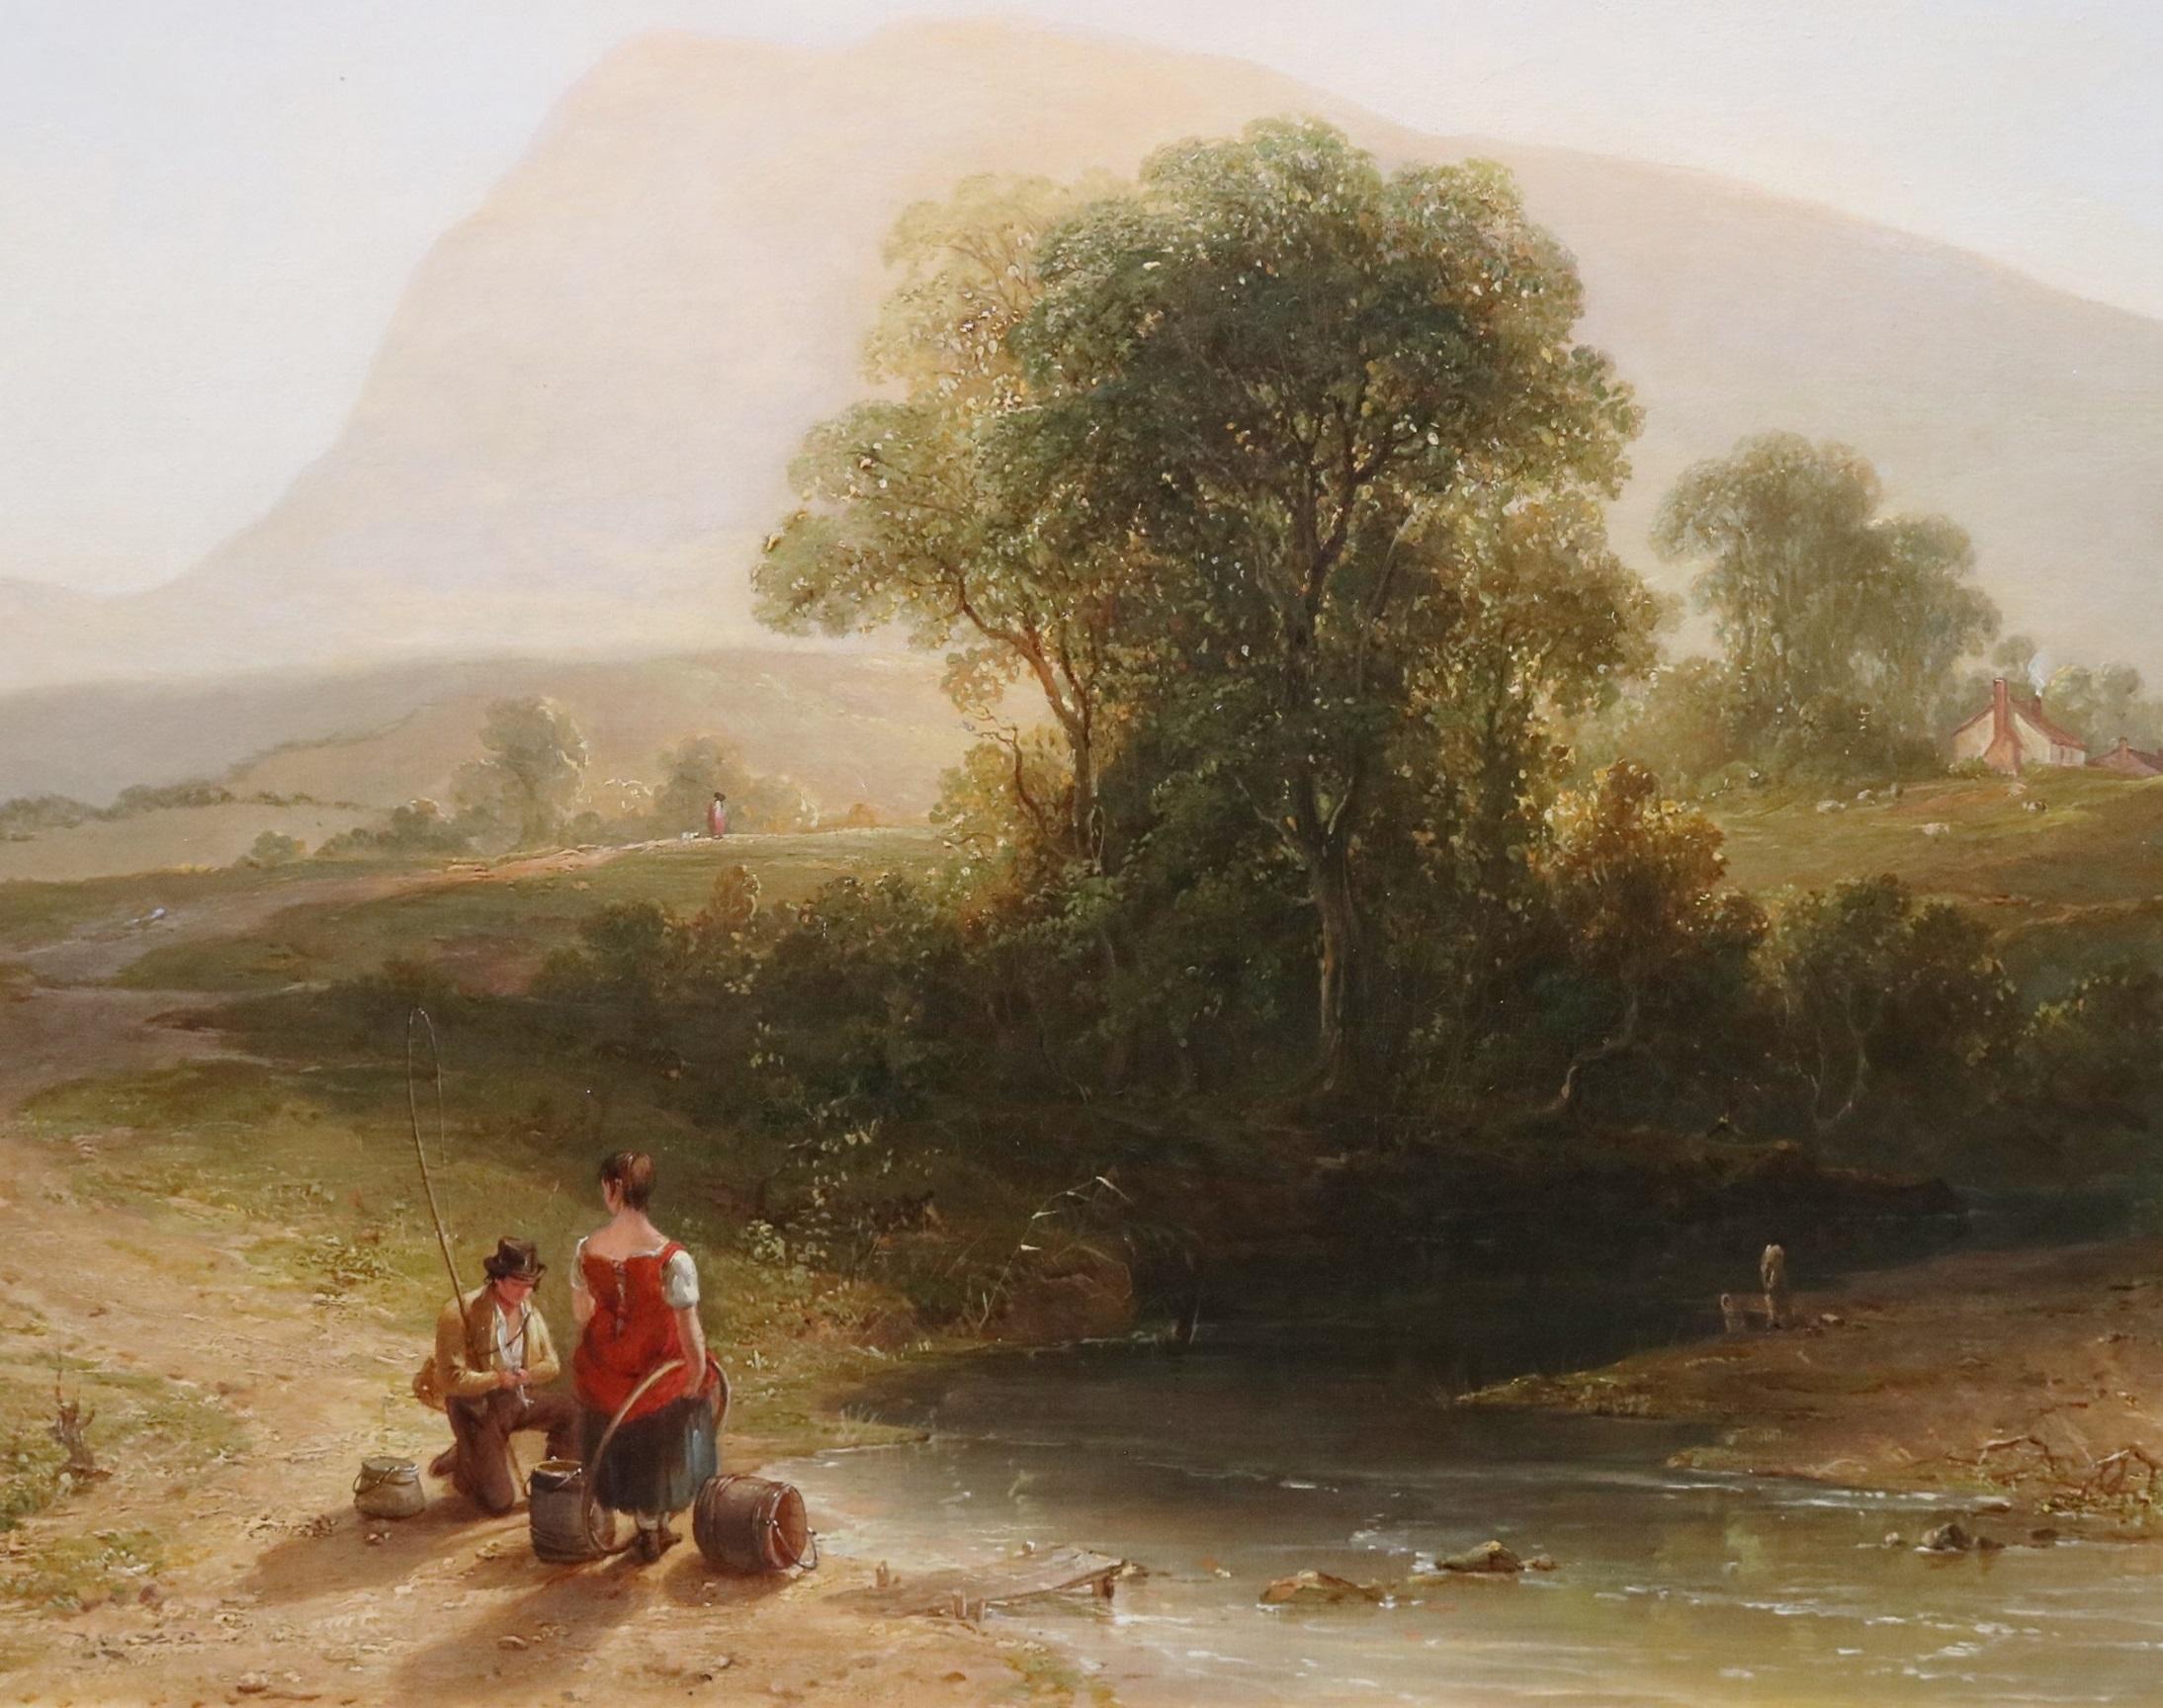 River Scene near Scarborough - 19th Century Exhibition Landscape Oil Painting  - Brown Landscape Painting by  John Frederick Tennant RBA